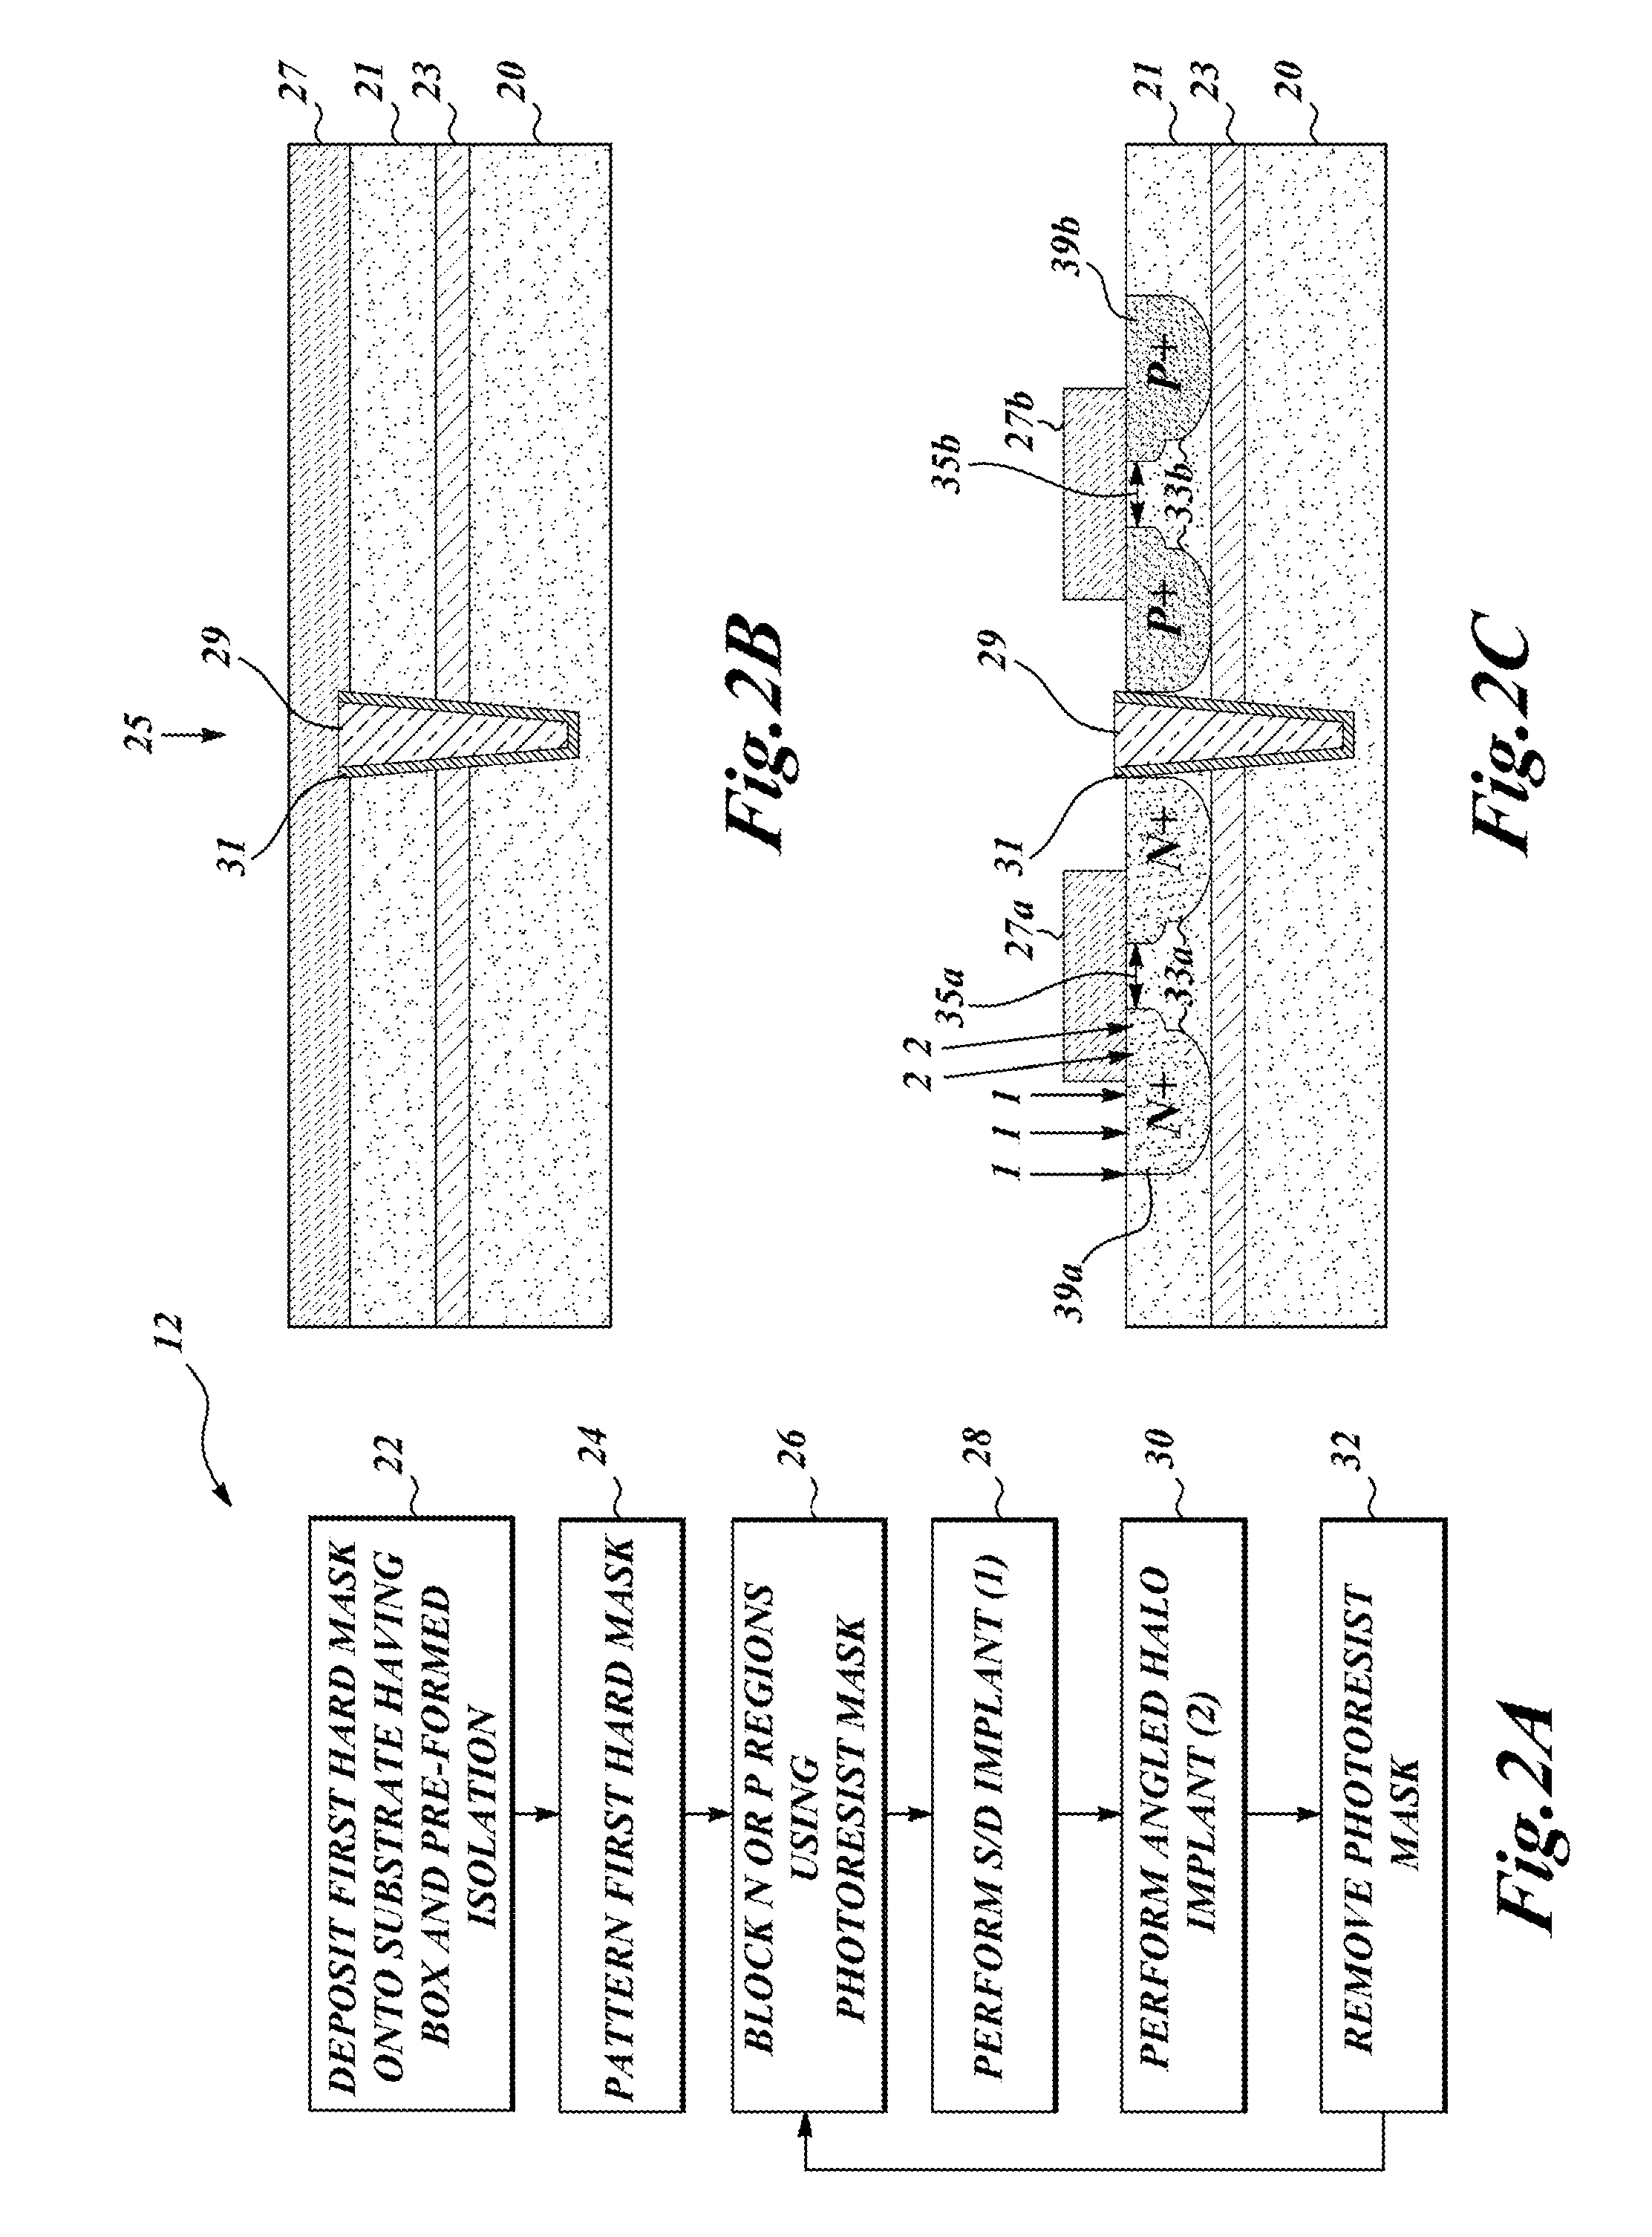 Silicon on insulator device with partially recessed gate